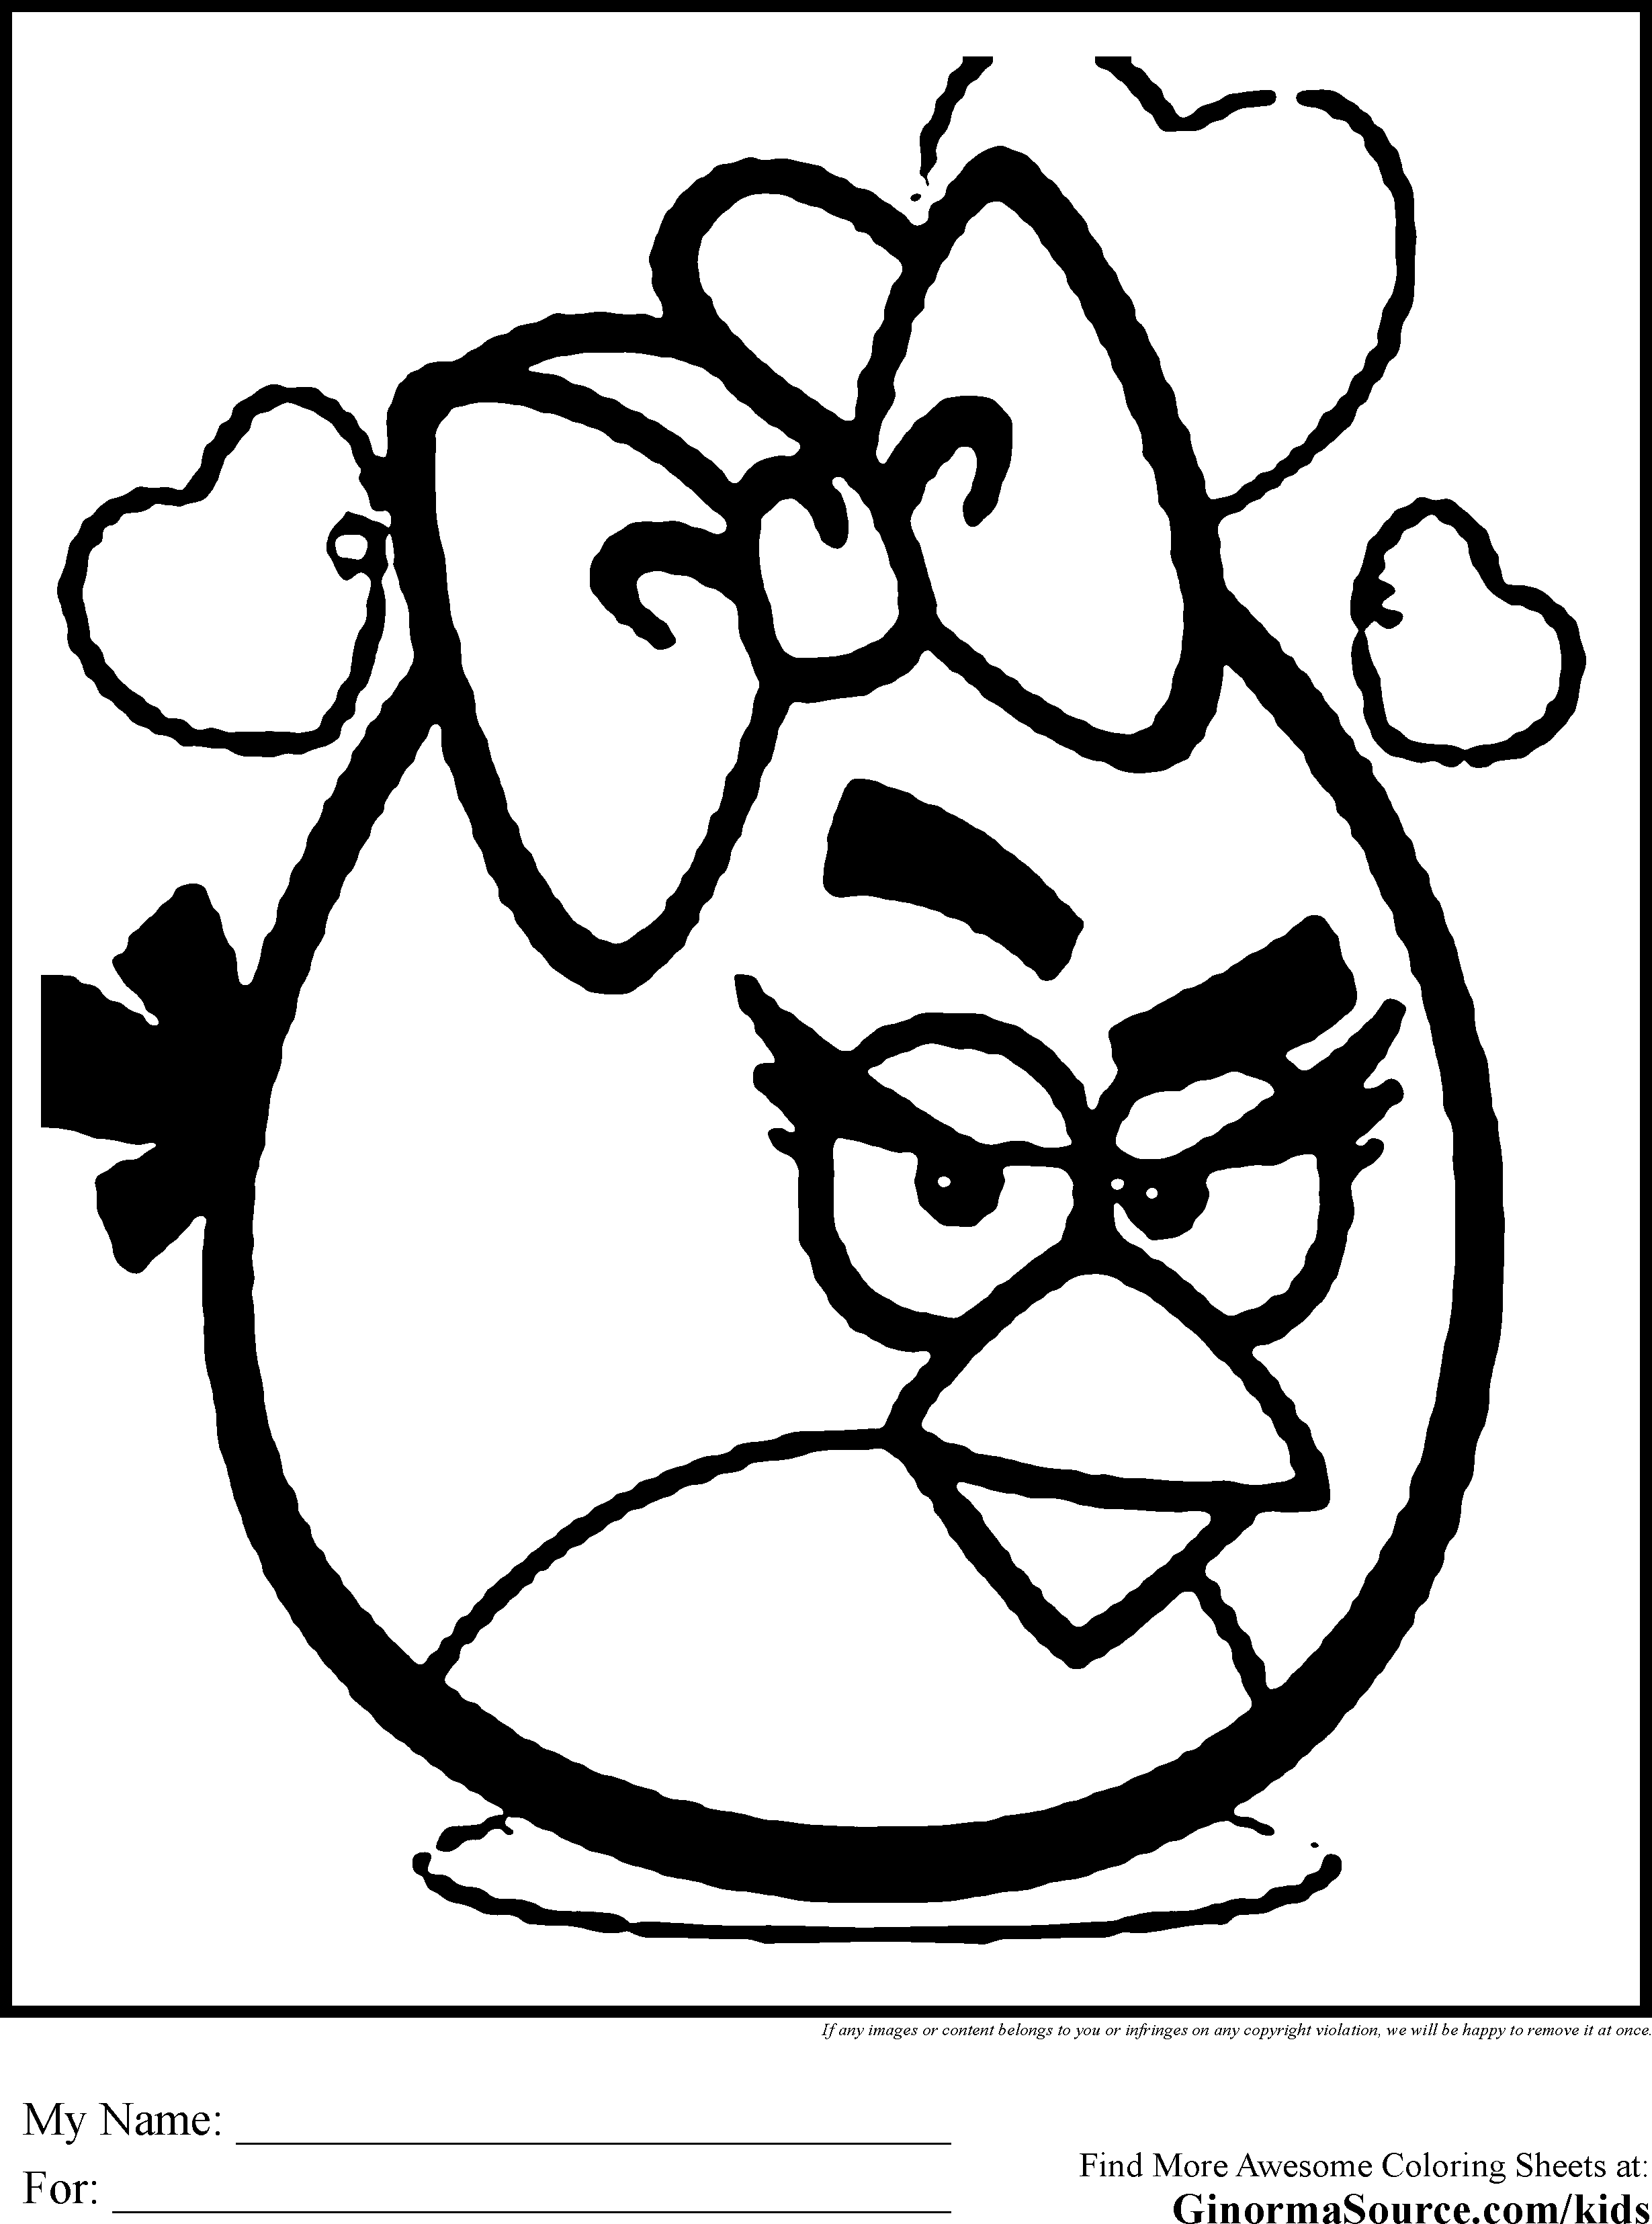 Angry Kitty Coloring Pages - Coloring Pages For All Ages